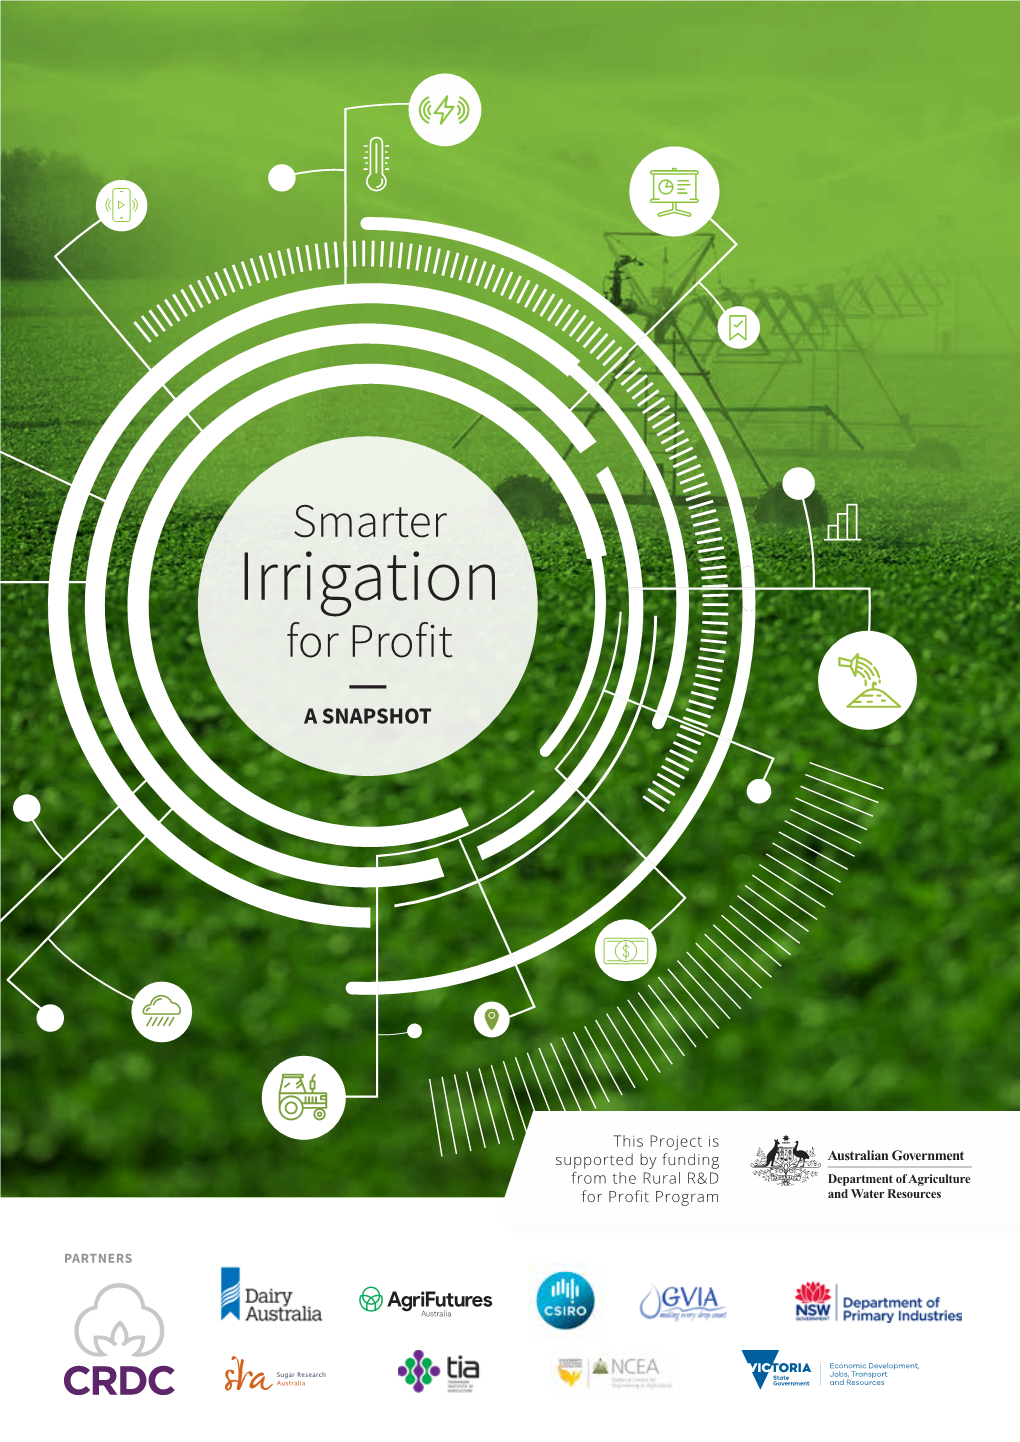 Smarter Irrigation for Profit Snapshot, with Some Amendment (Shown in Green) to Reflect the Focus of the Project